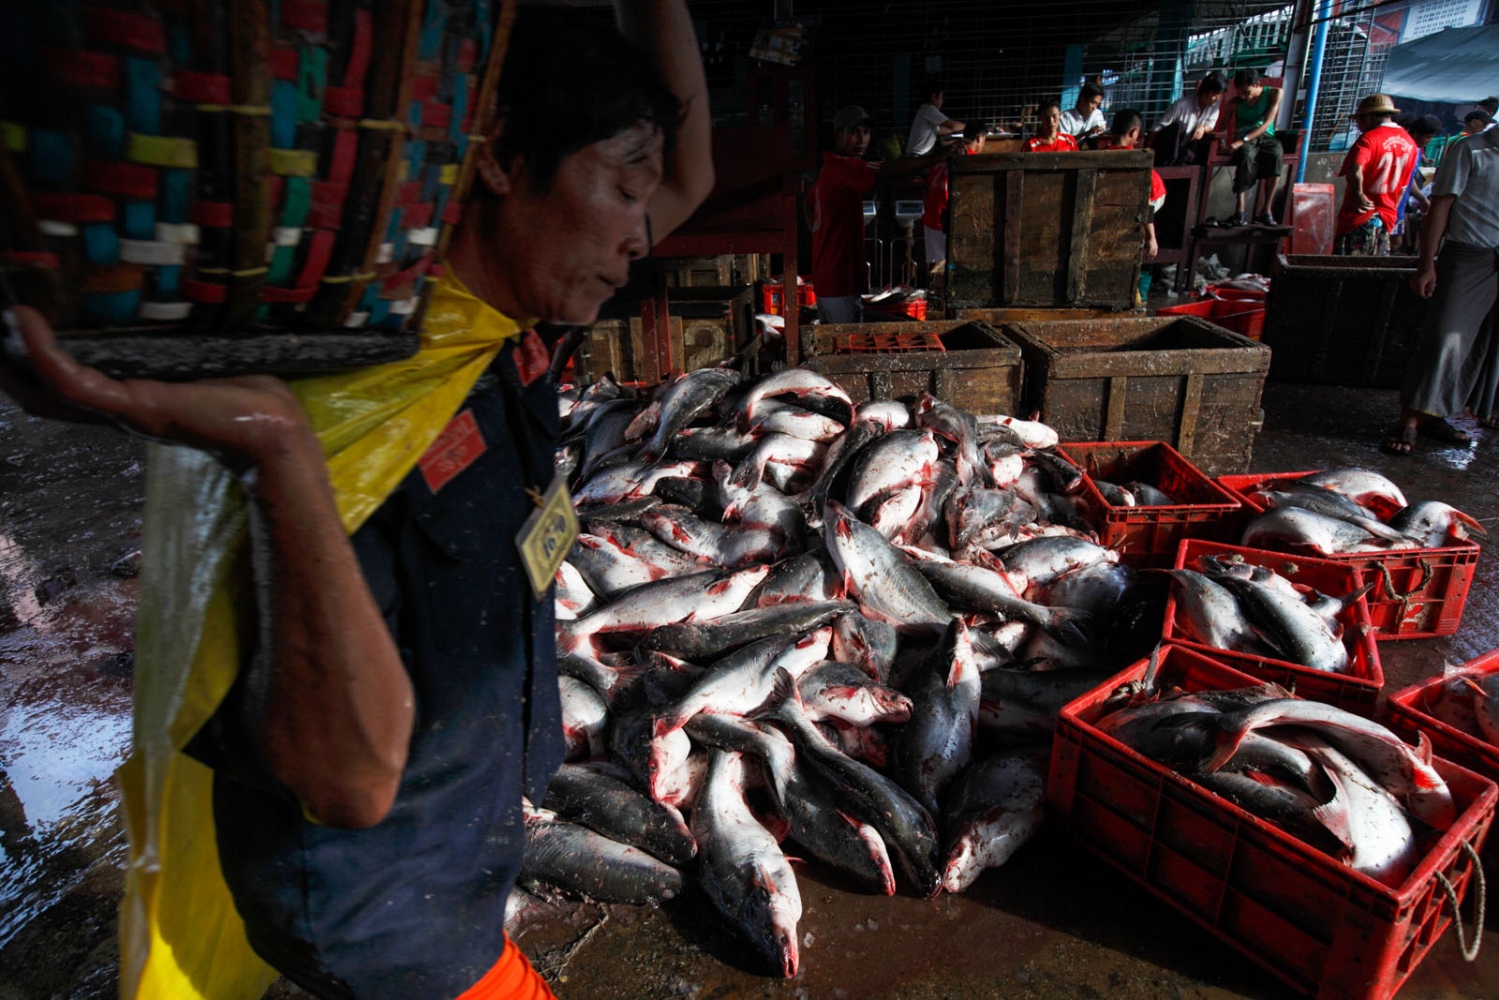 EMPTYING THE SEAS - Tonnes of fish are unloaded from boats, sold, packaged...